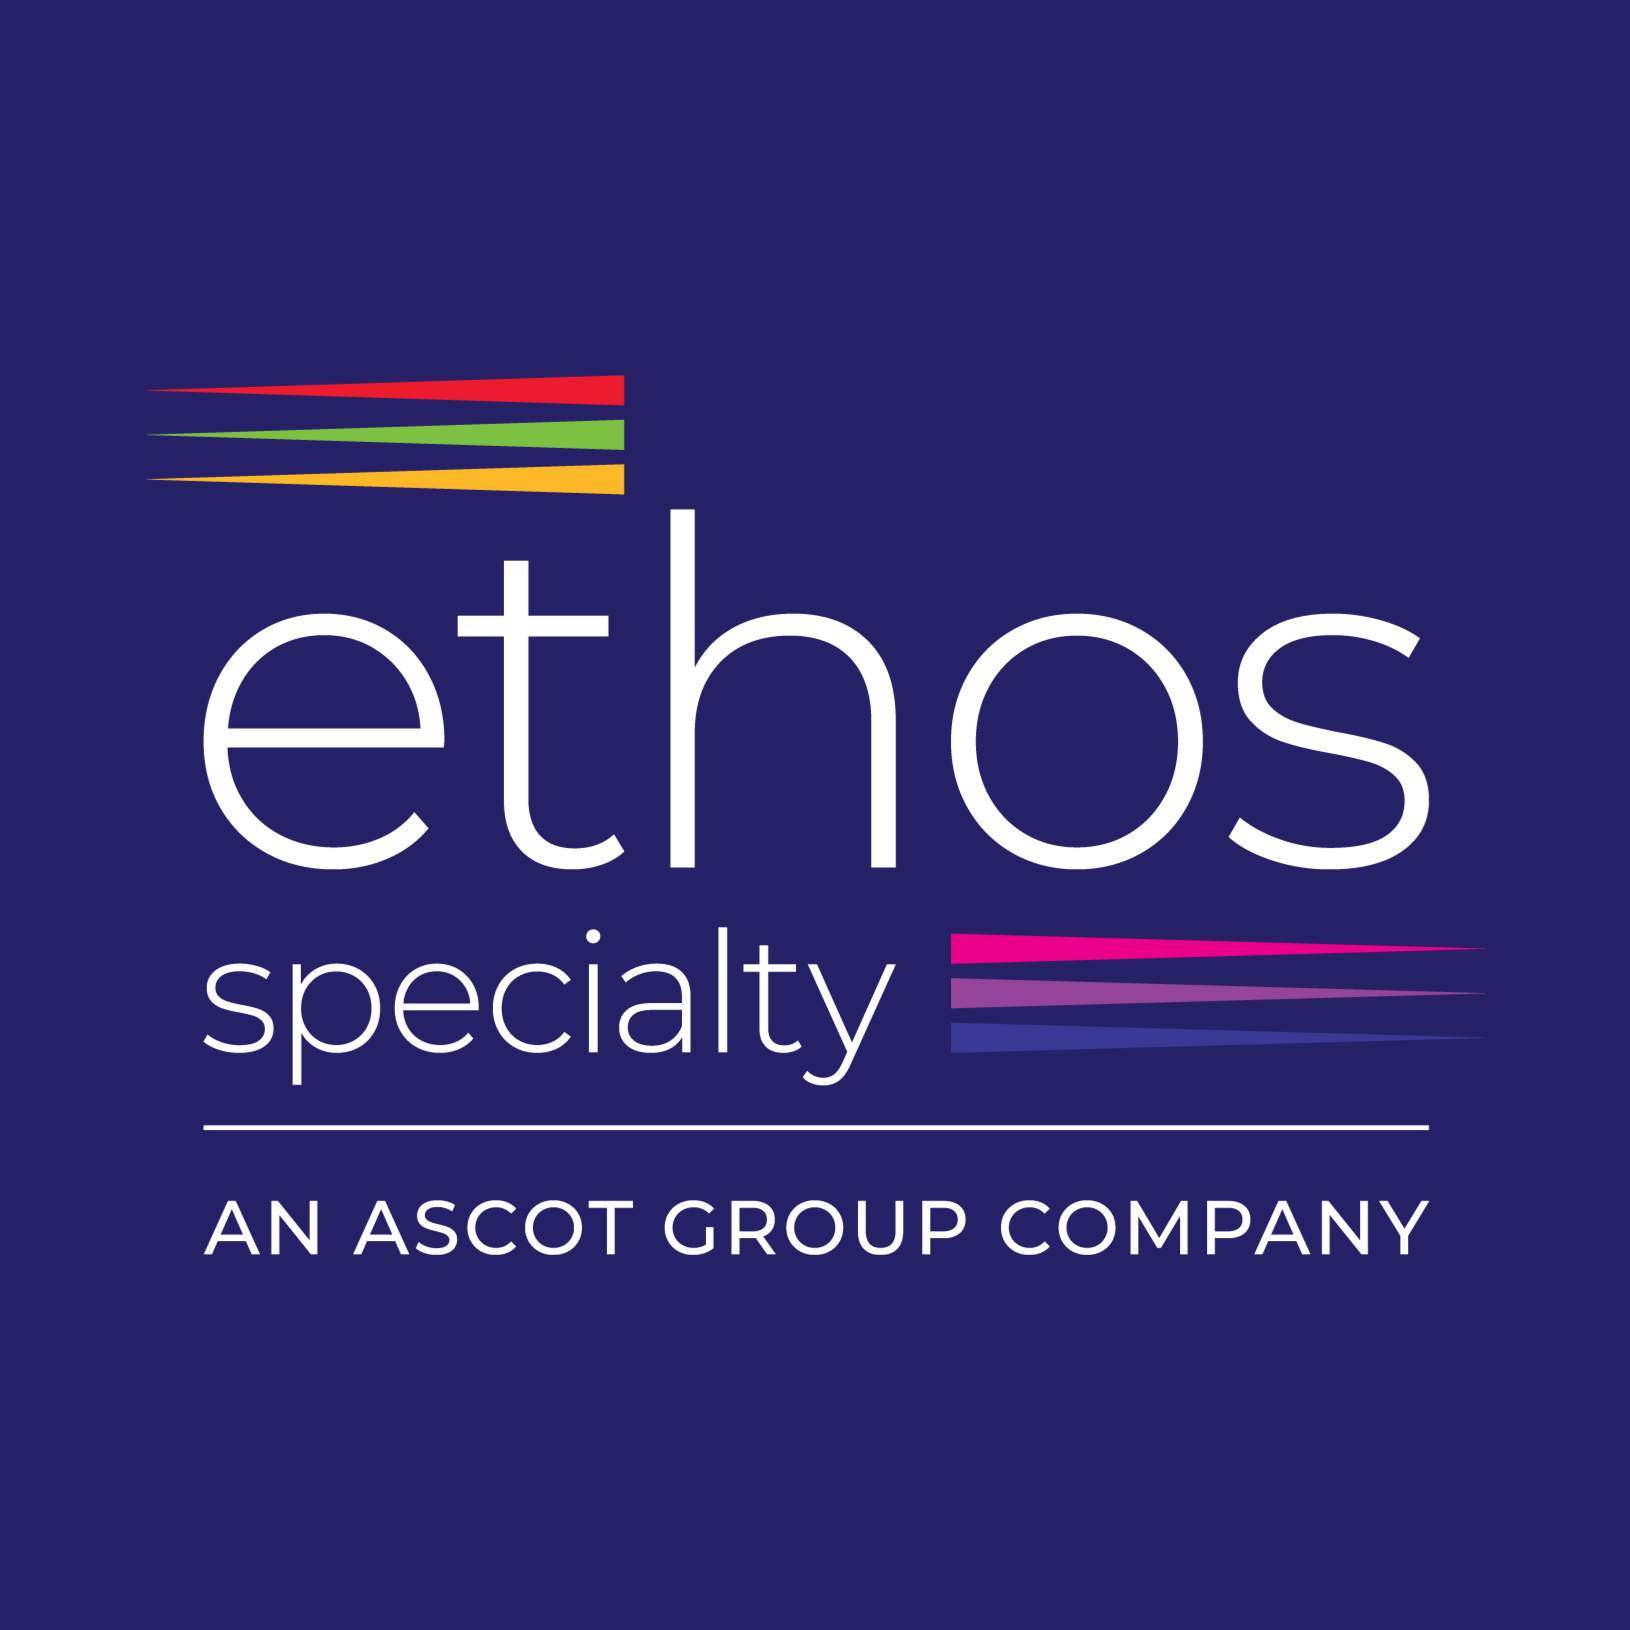 About Us - Ethos Specialty